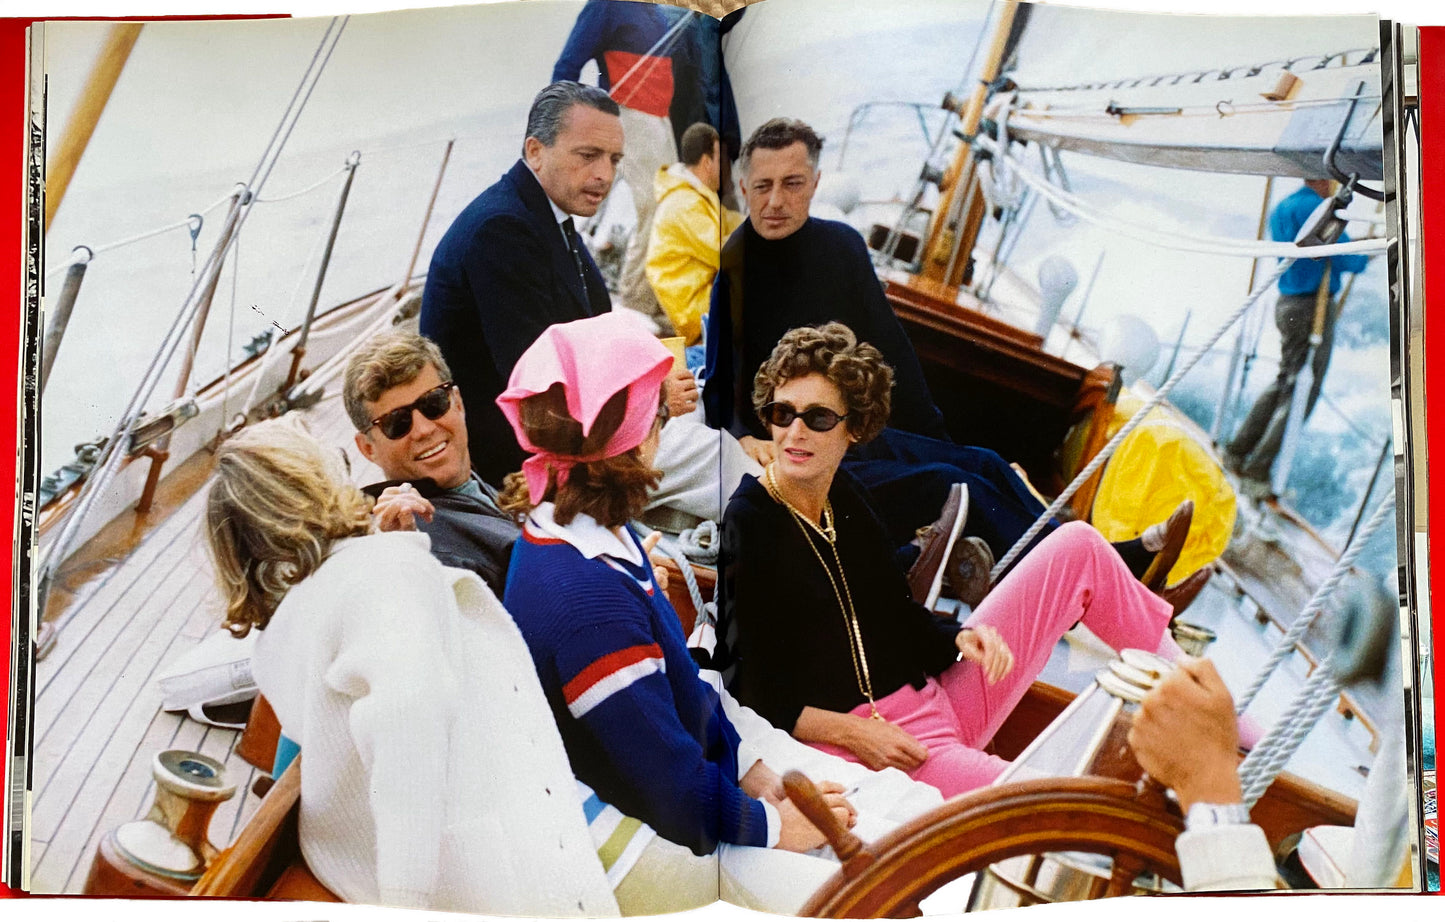 Jetset, Glamorous, Elegant, Classic, Modern. These words describe Princess Marella Agnelli patron to all that was new in the decorative arts. This book is her detailed through photo and stories. Te Plus Te Archive.